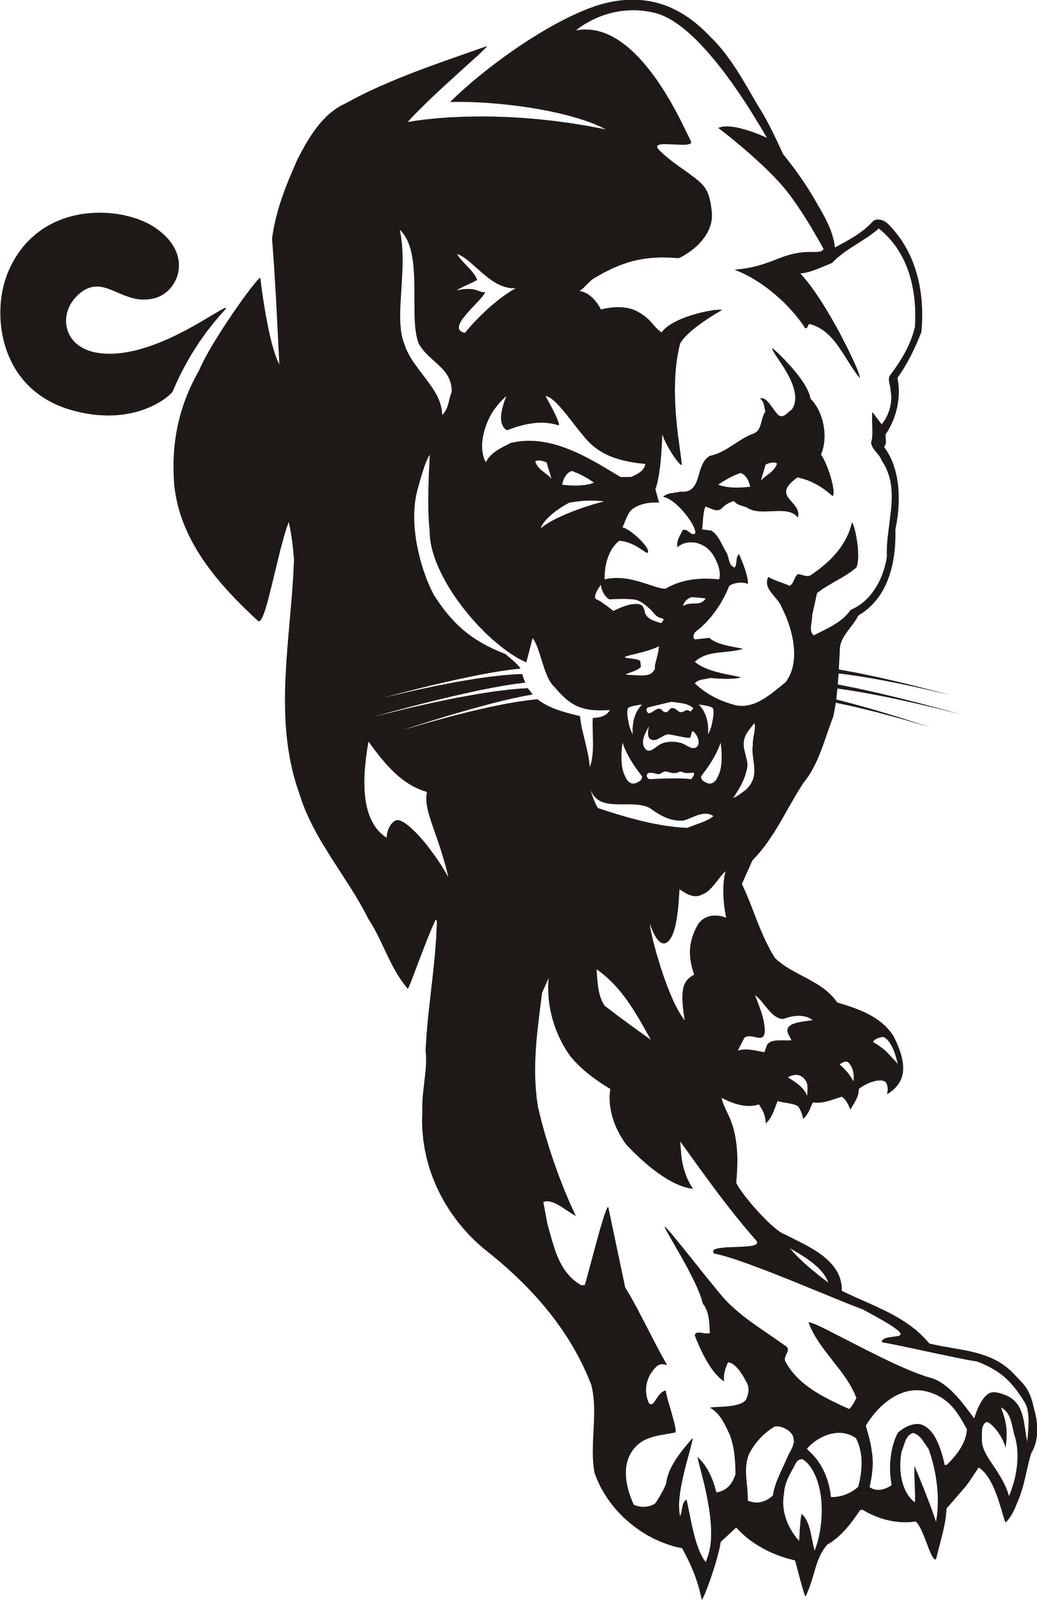 Panther silhouette clip art vector clip art online royalty free image #8739